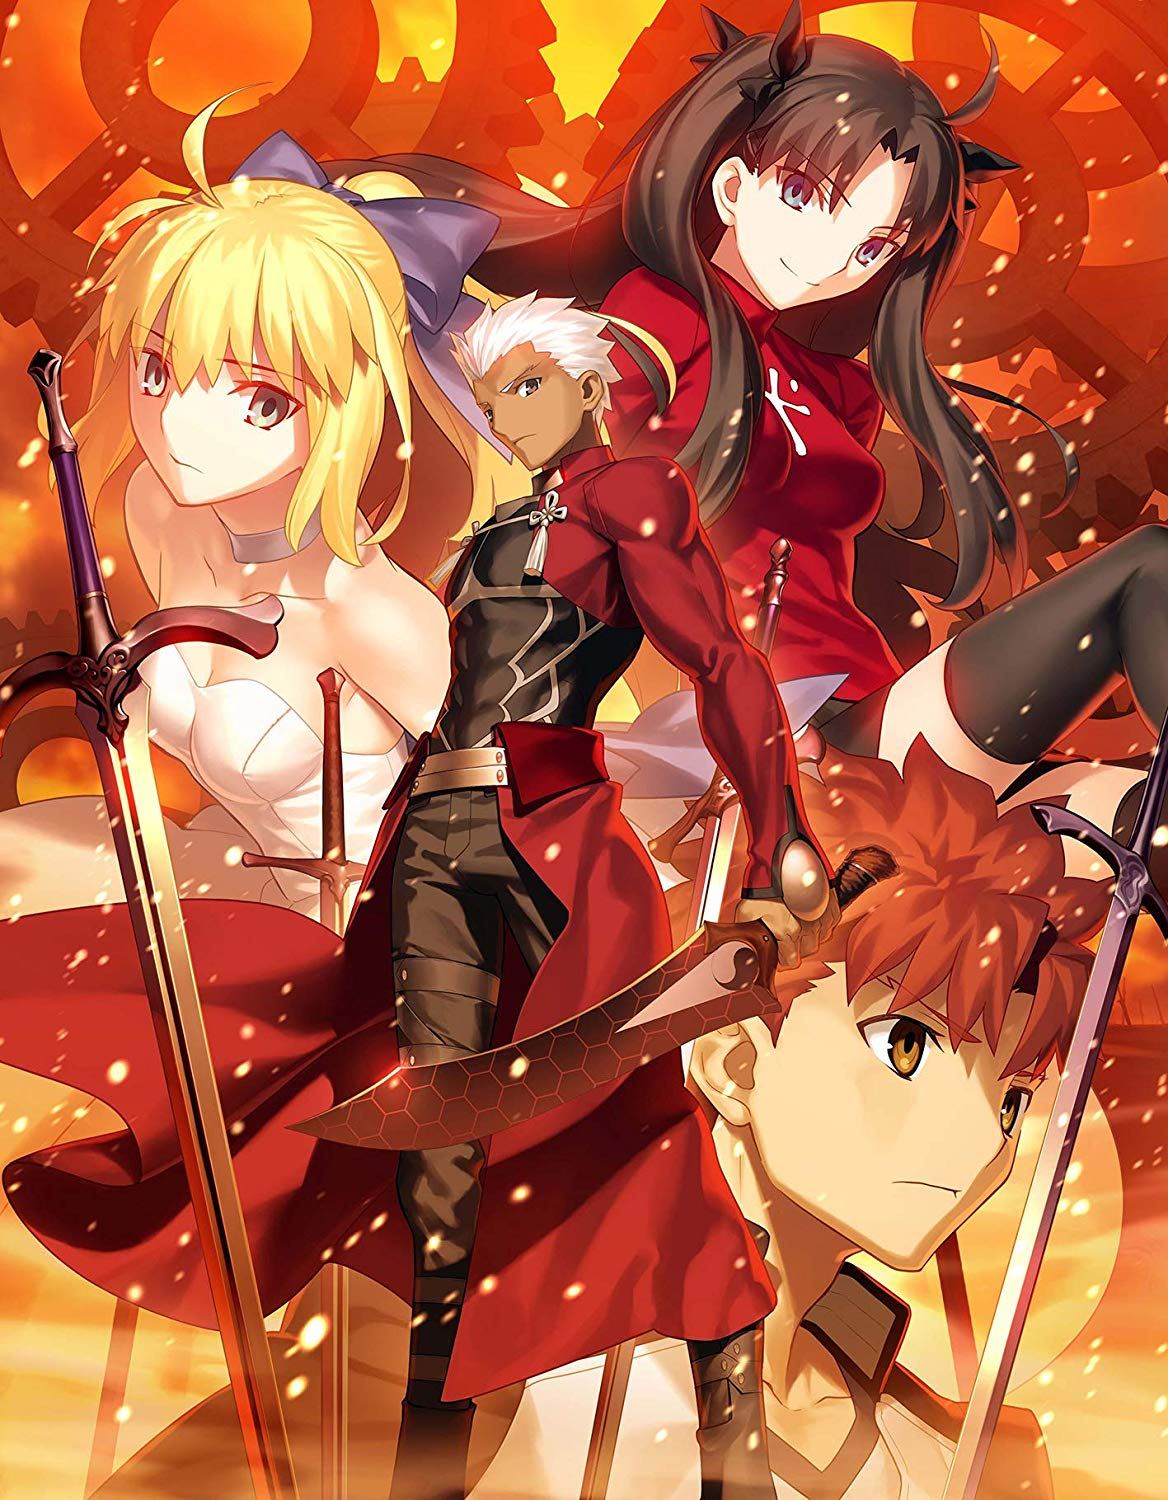 Fate/Stay Night - Unlimited Blade Works Blu-ray Disc Box [Standard Edition]